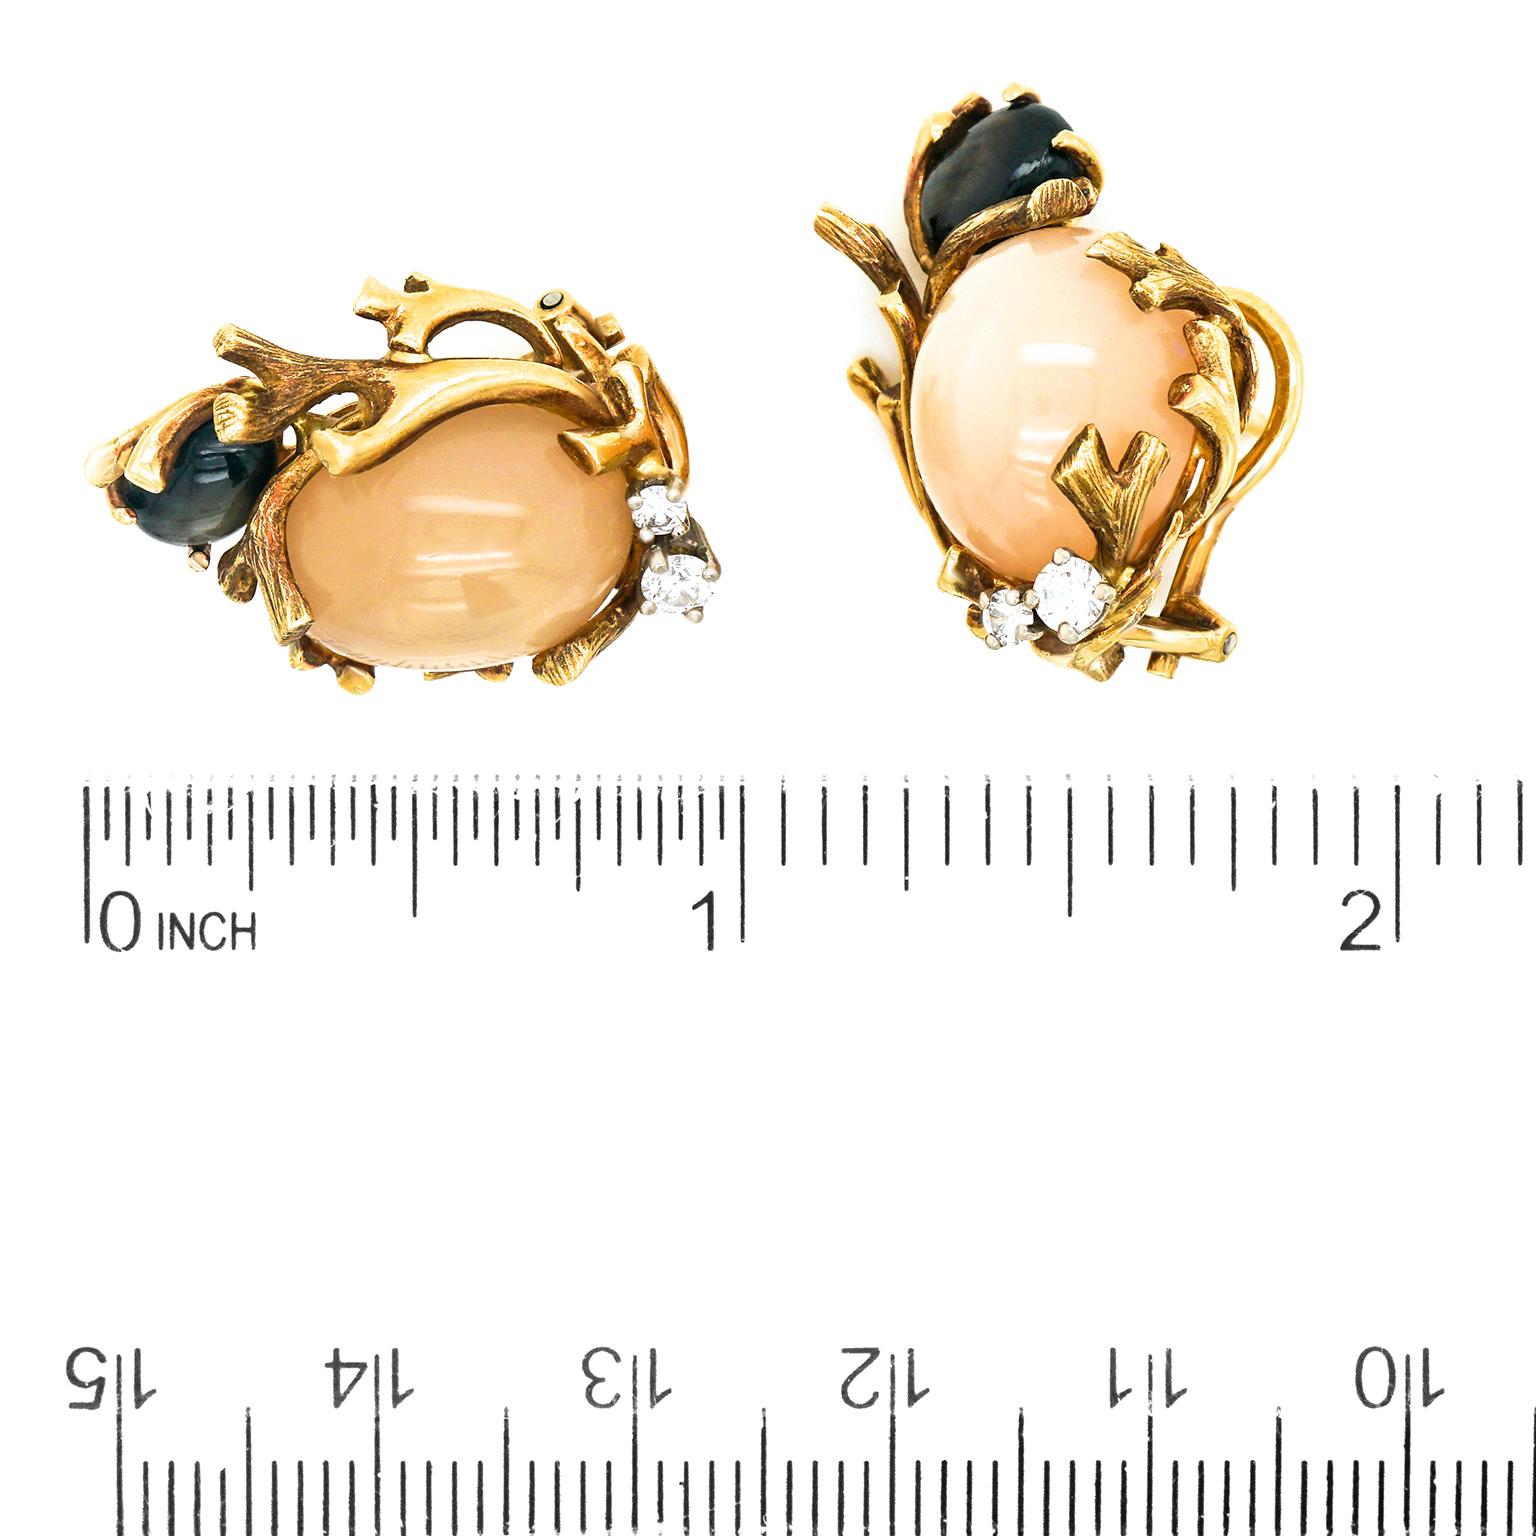 Cabochon Gilbert Albert Organo-Chic Seventies Gold Earrings For Sale